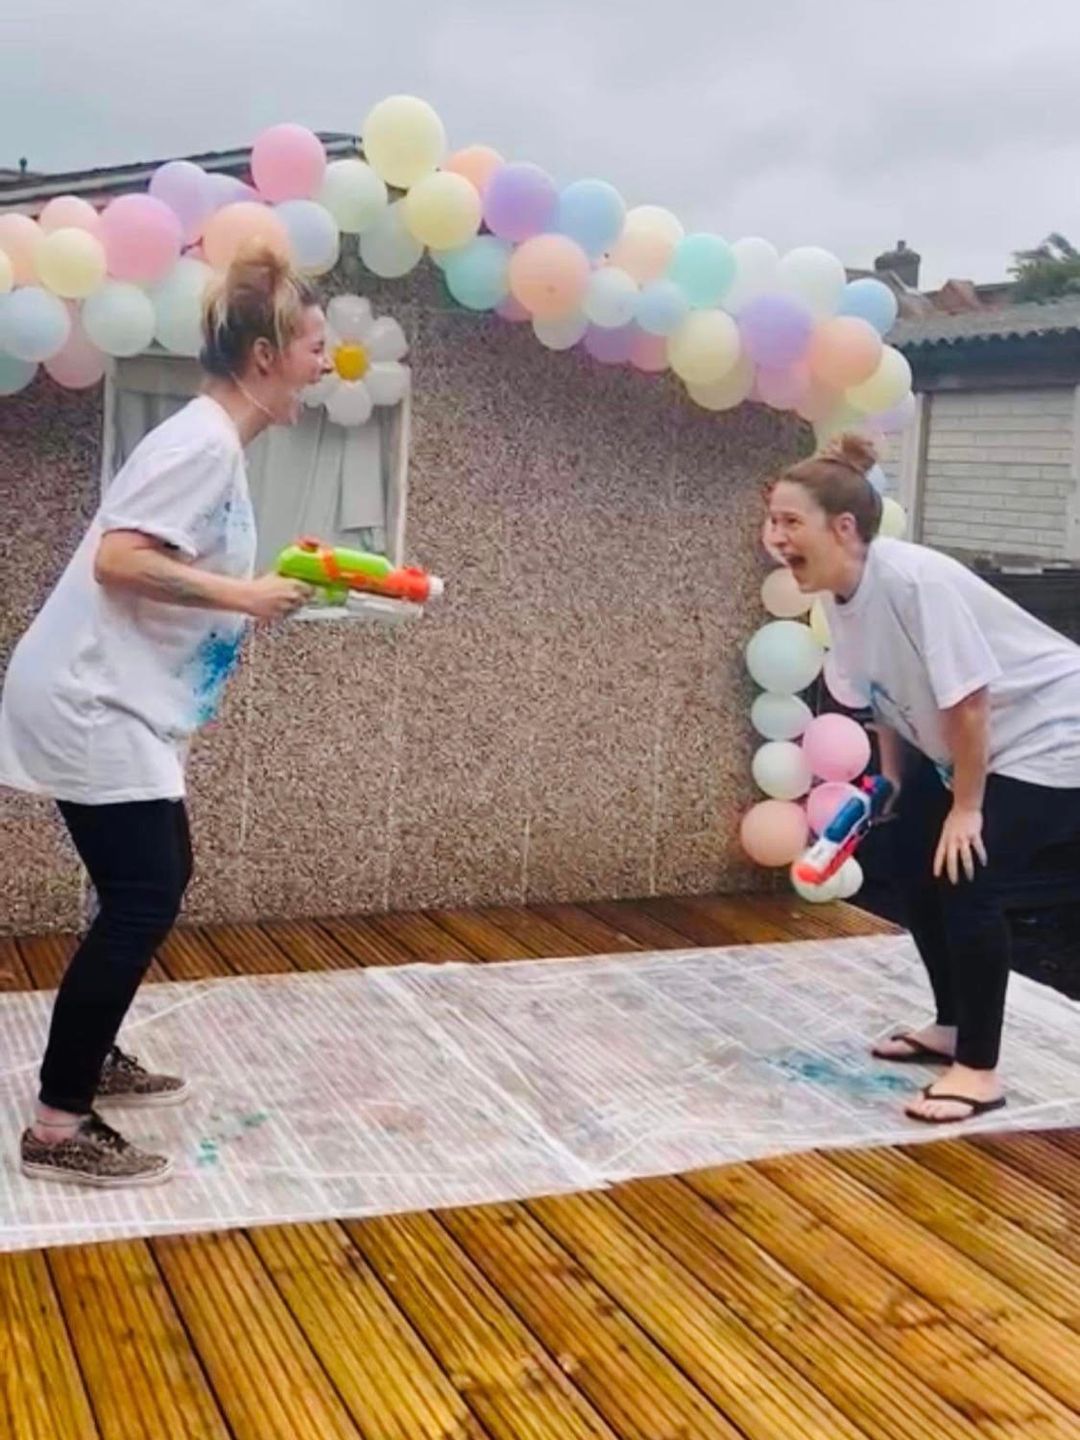 The couple had a fun gender reveal with water pistols